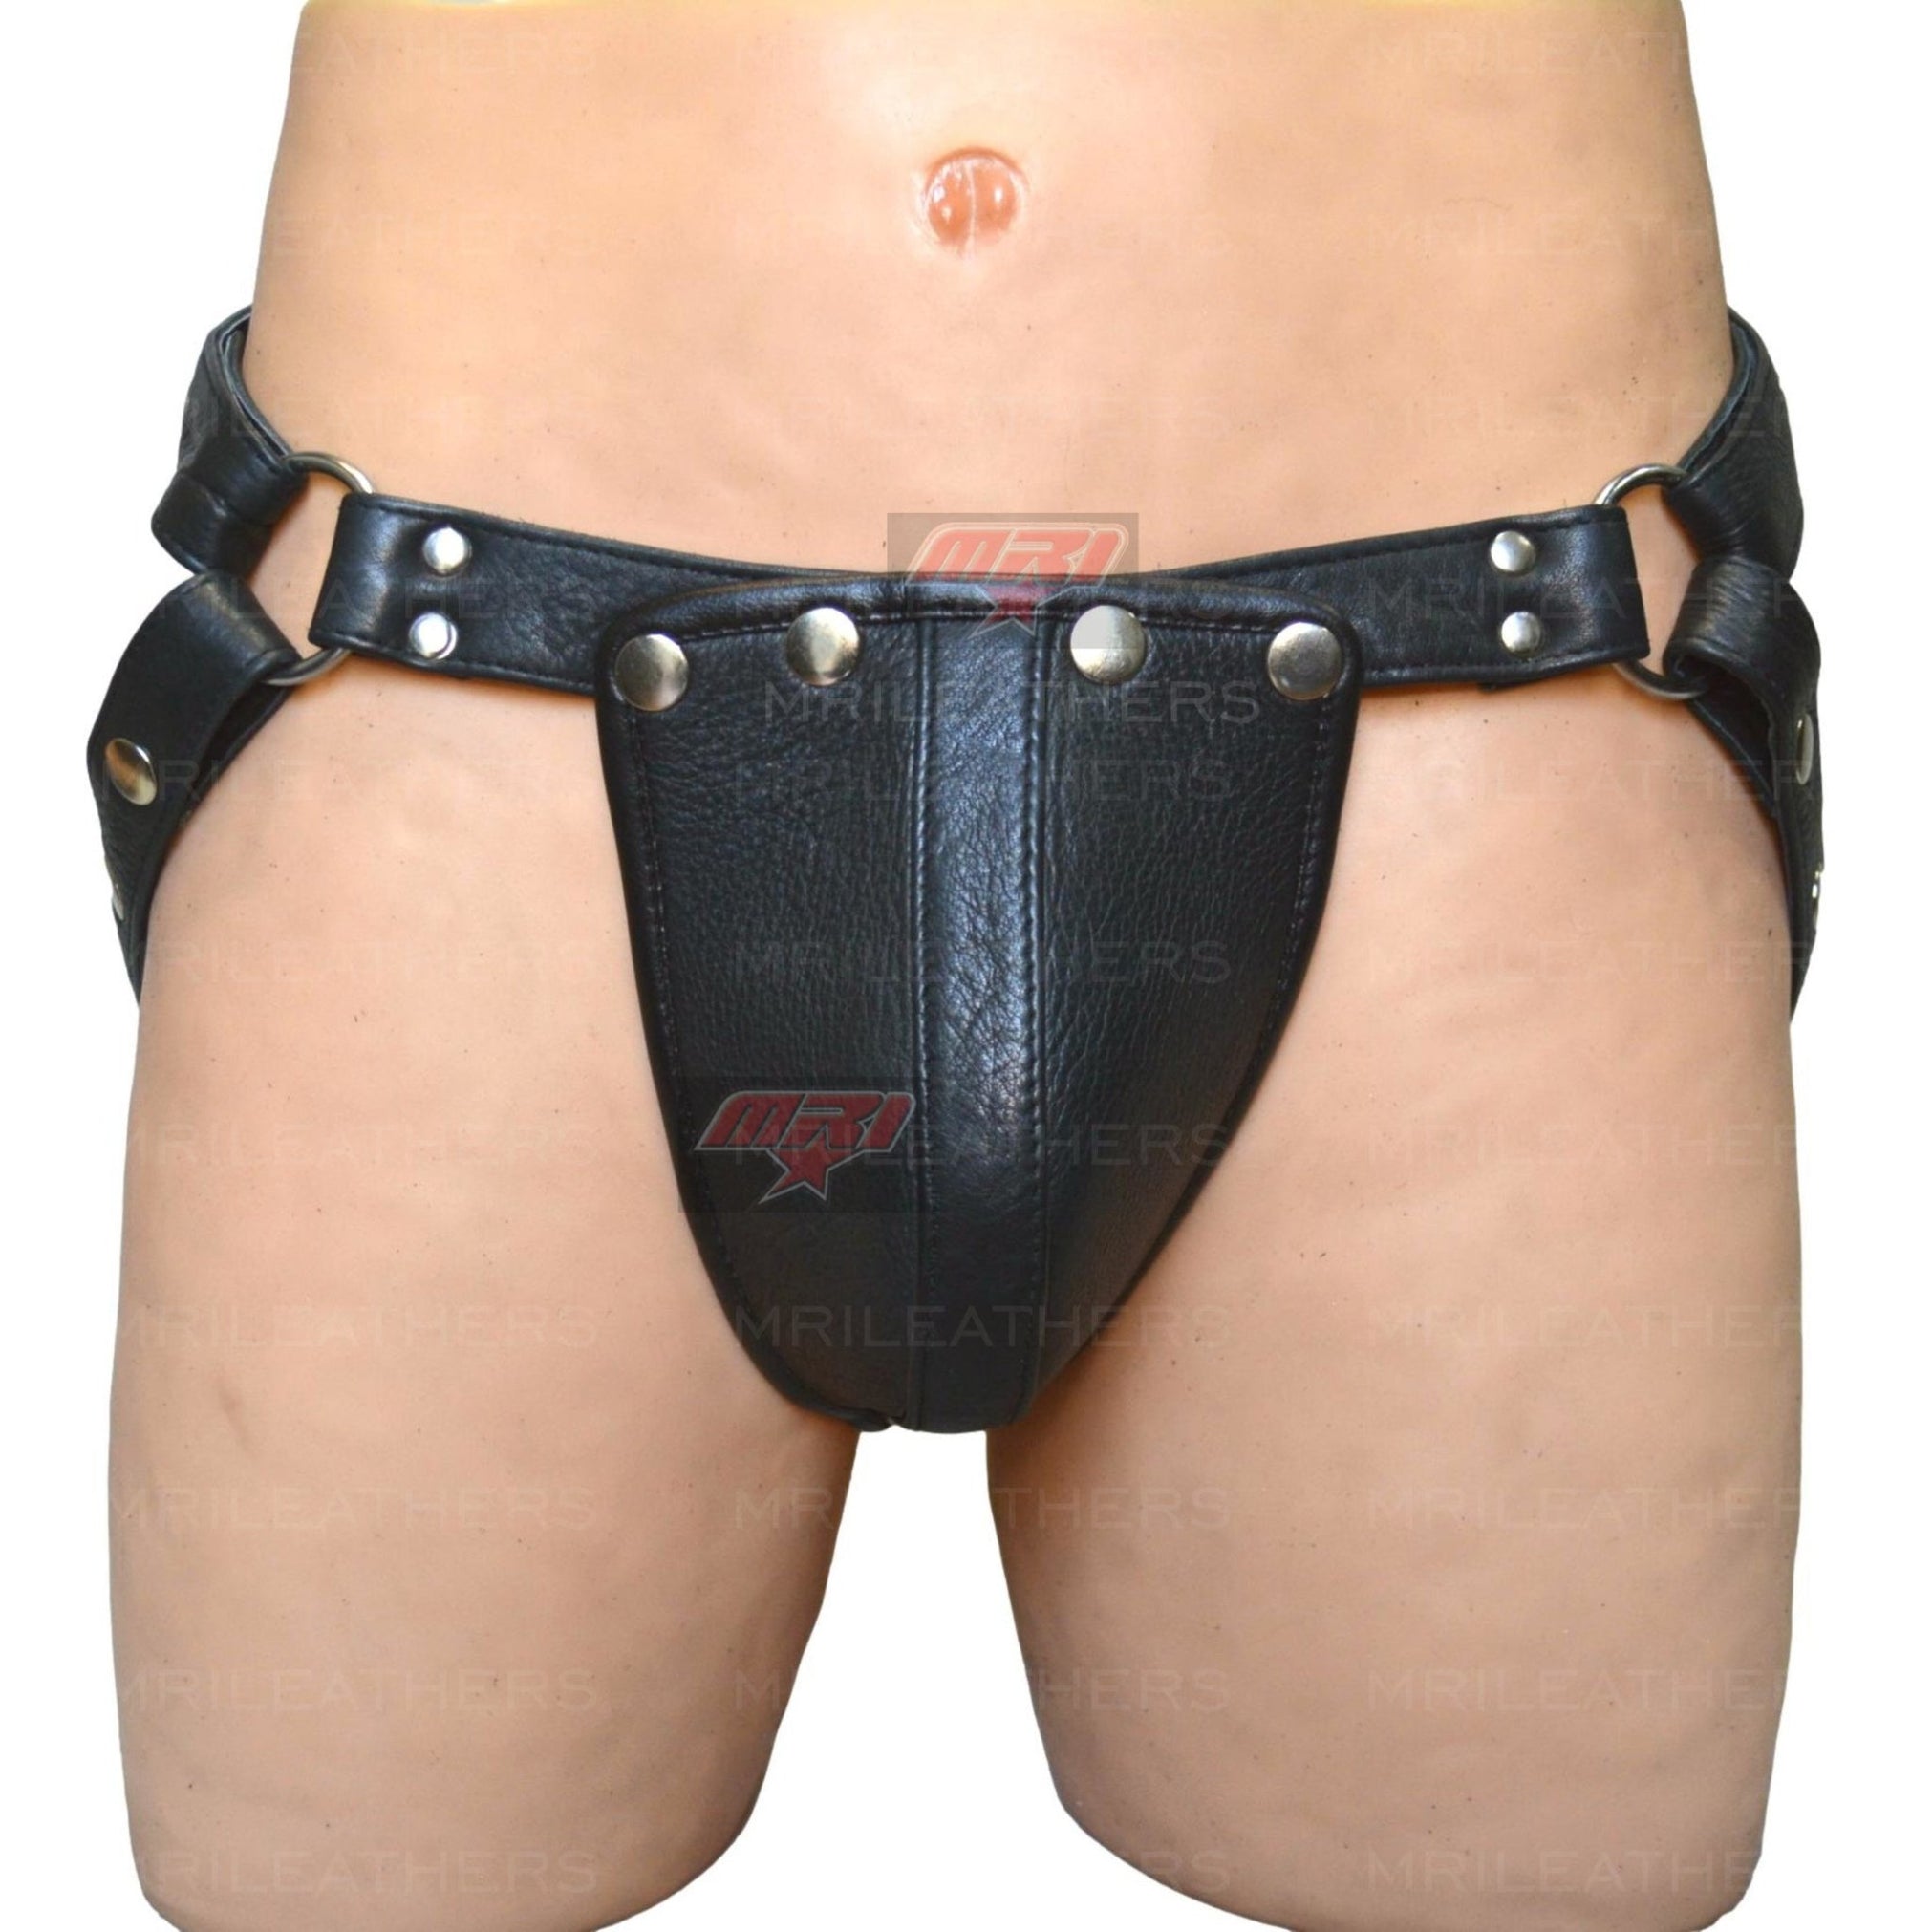 Men Leather Jockstrap -jock -thong removable pouch, lined with soft leather  stud spike $81.90